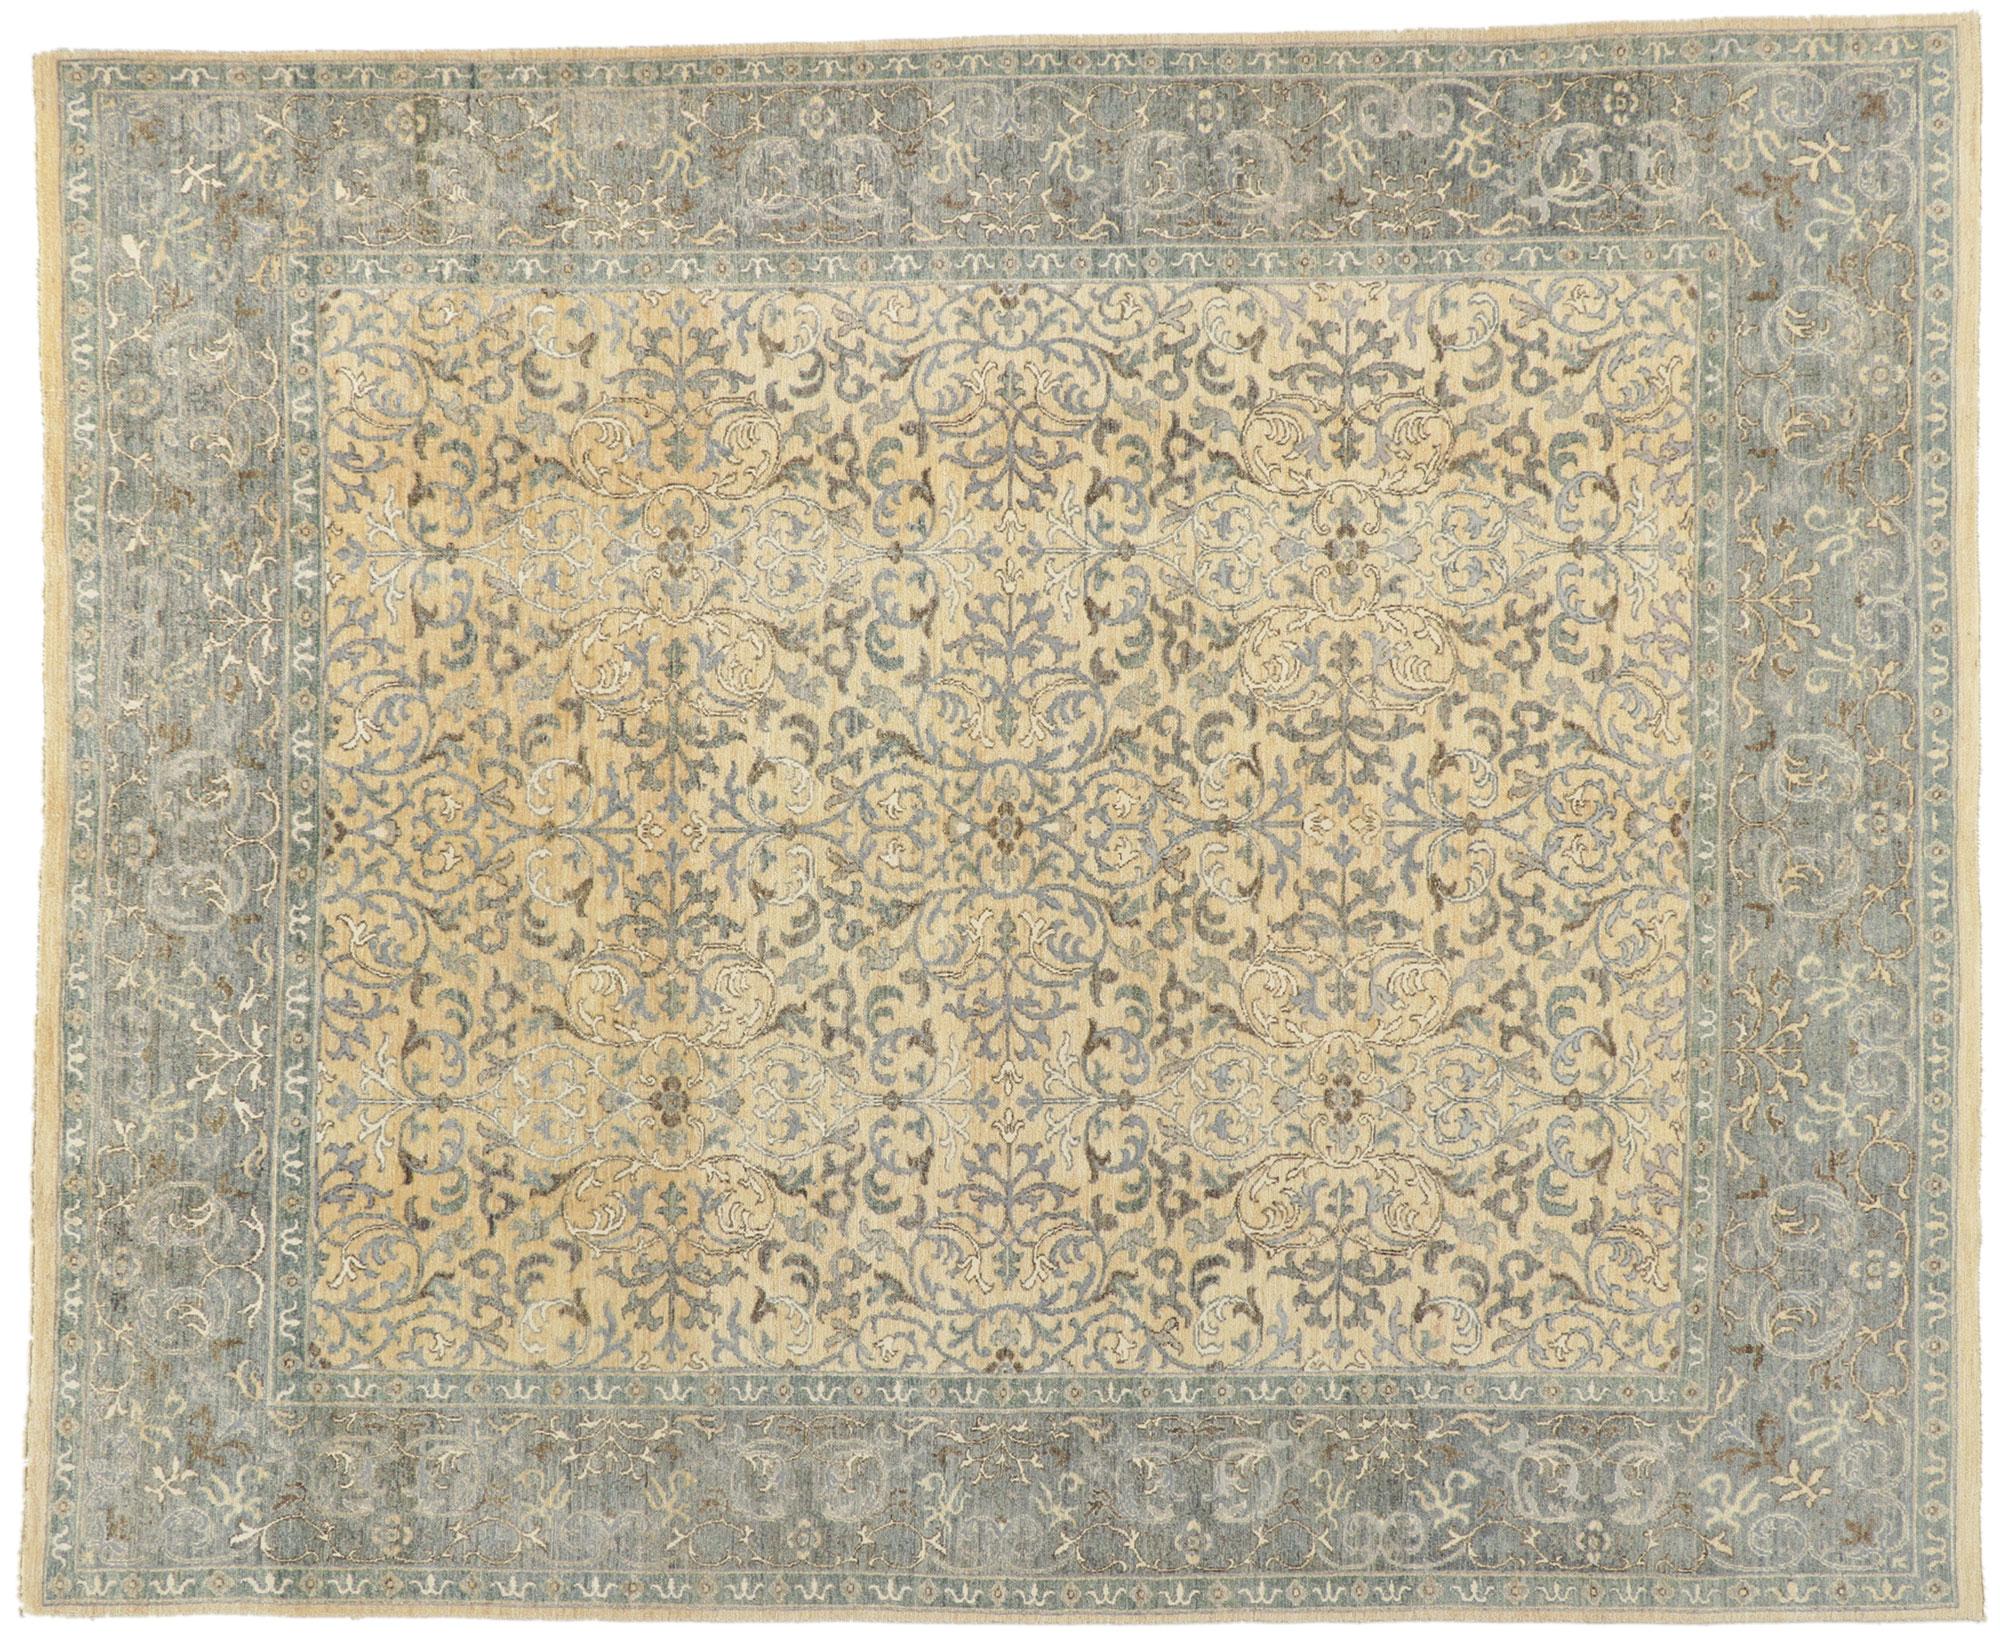 New Transitional Damask Scroll Rug with Soft Earth-Tone Colors For Sale 2